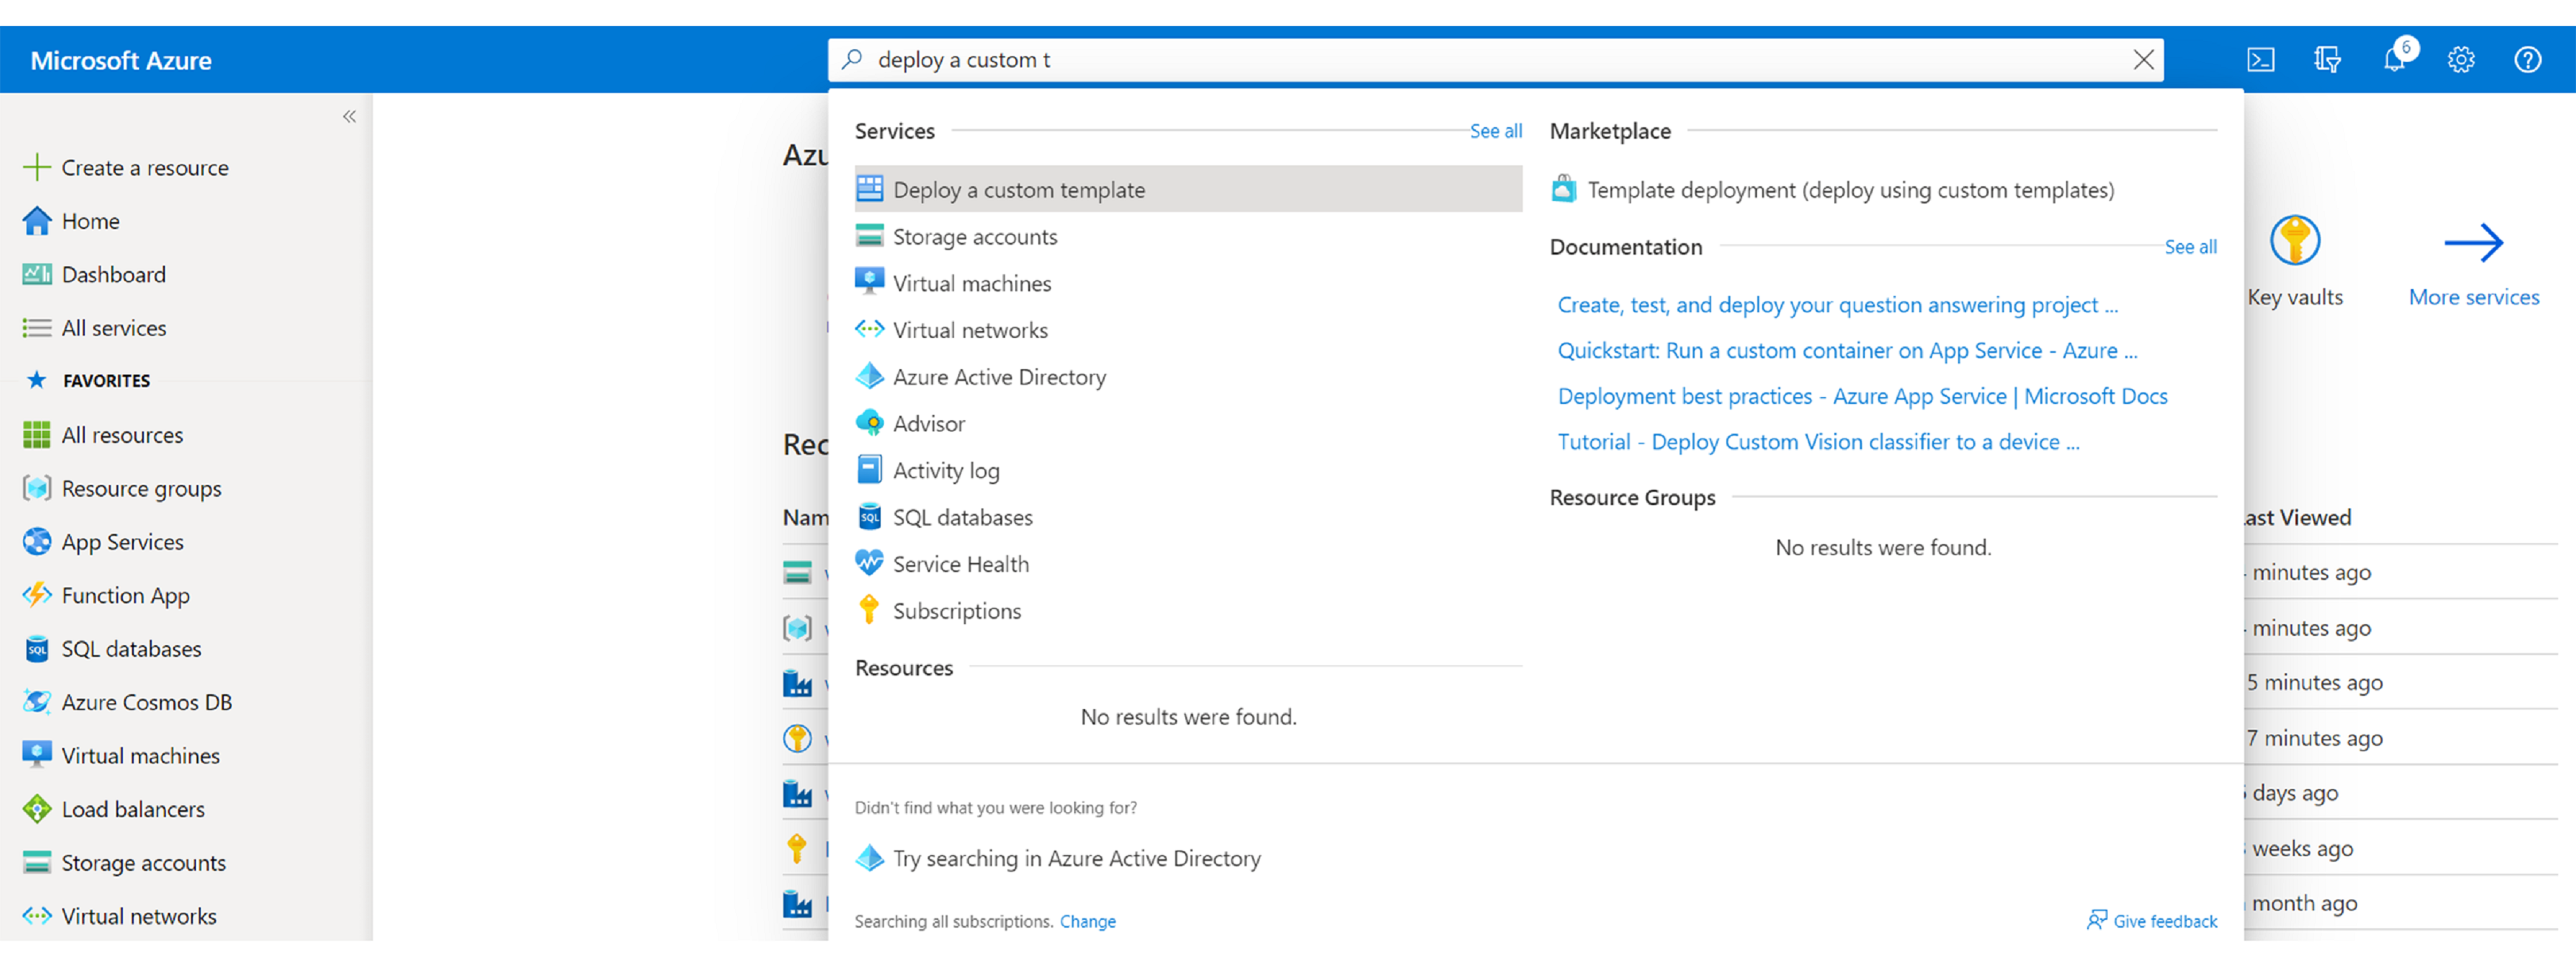 Screenshot that shows the deploy from a Custom Template option in Azure.